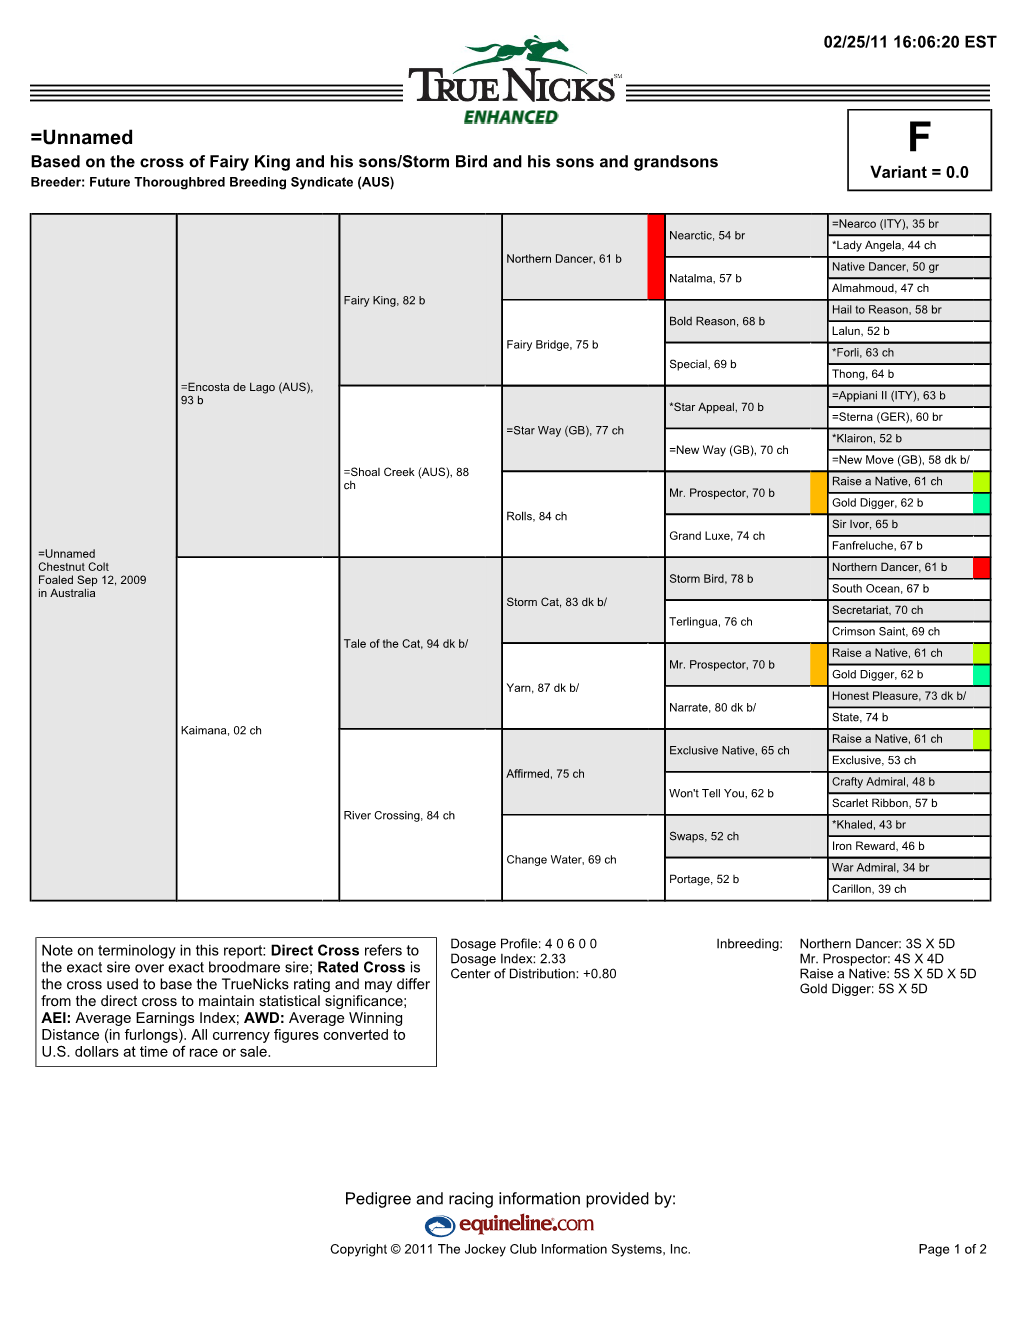 =Unnamed F Based on the Cross of Fairy King and His Sons/Storm Bird and His Sons and Grandsons Variant = 0.0 Breeder: Future Thoroughbred Breeding Syndicate (AUS)